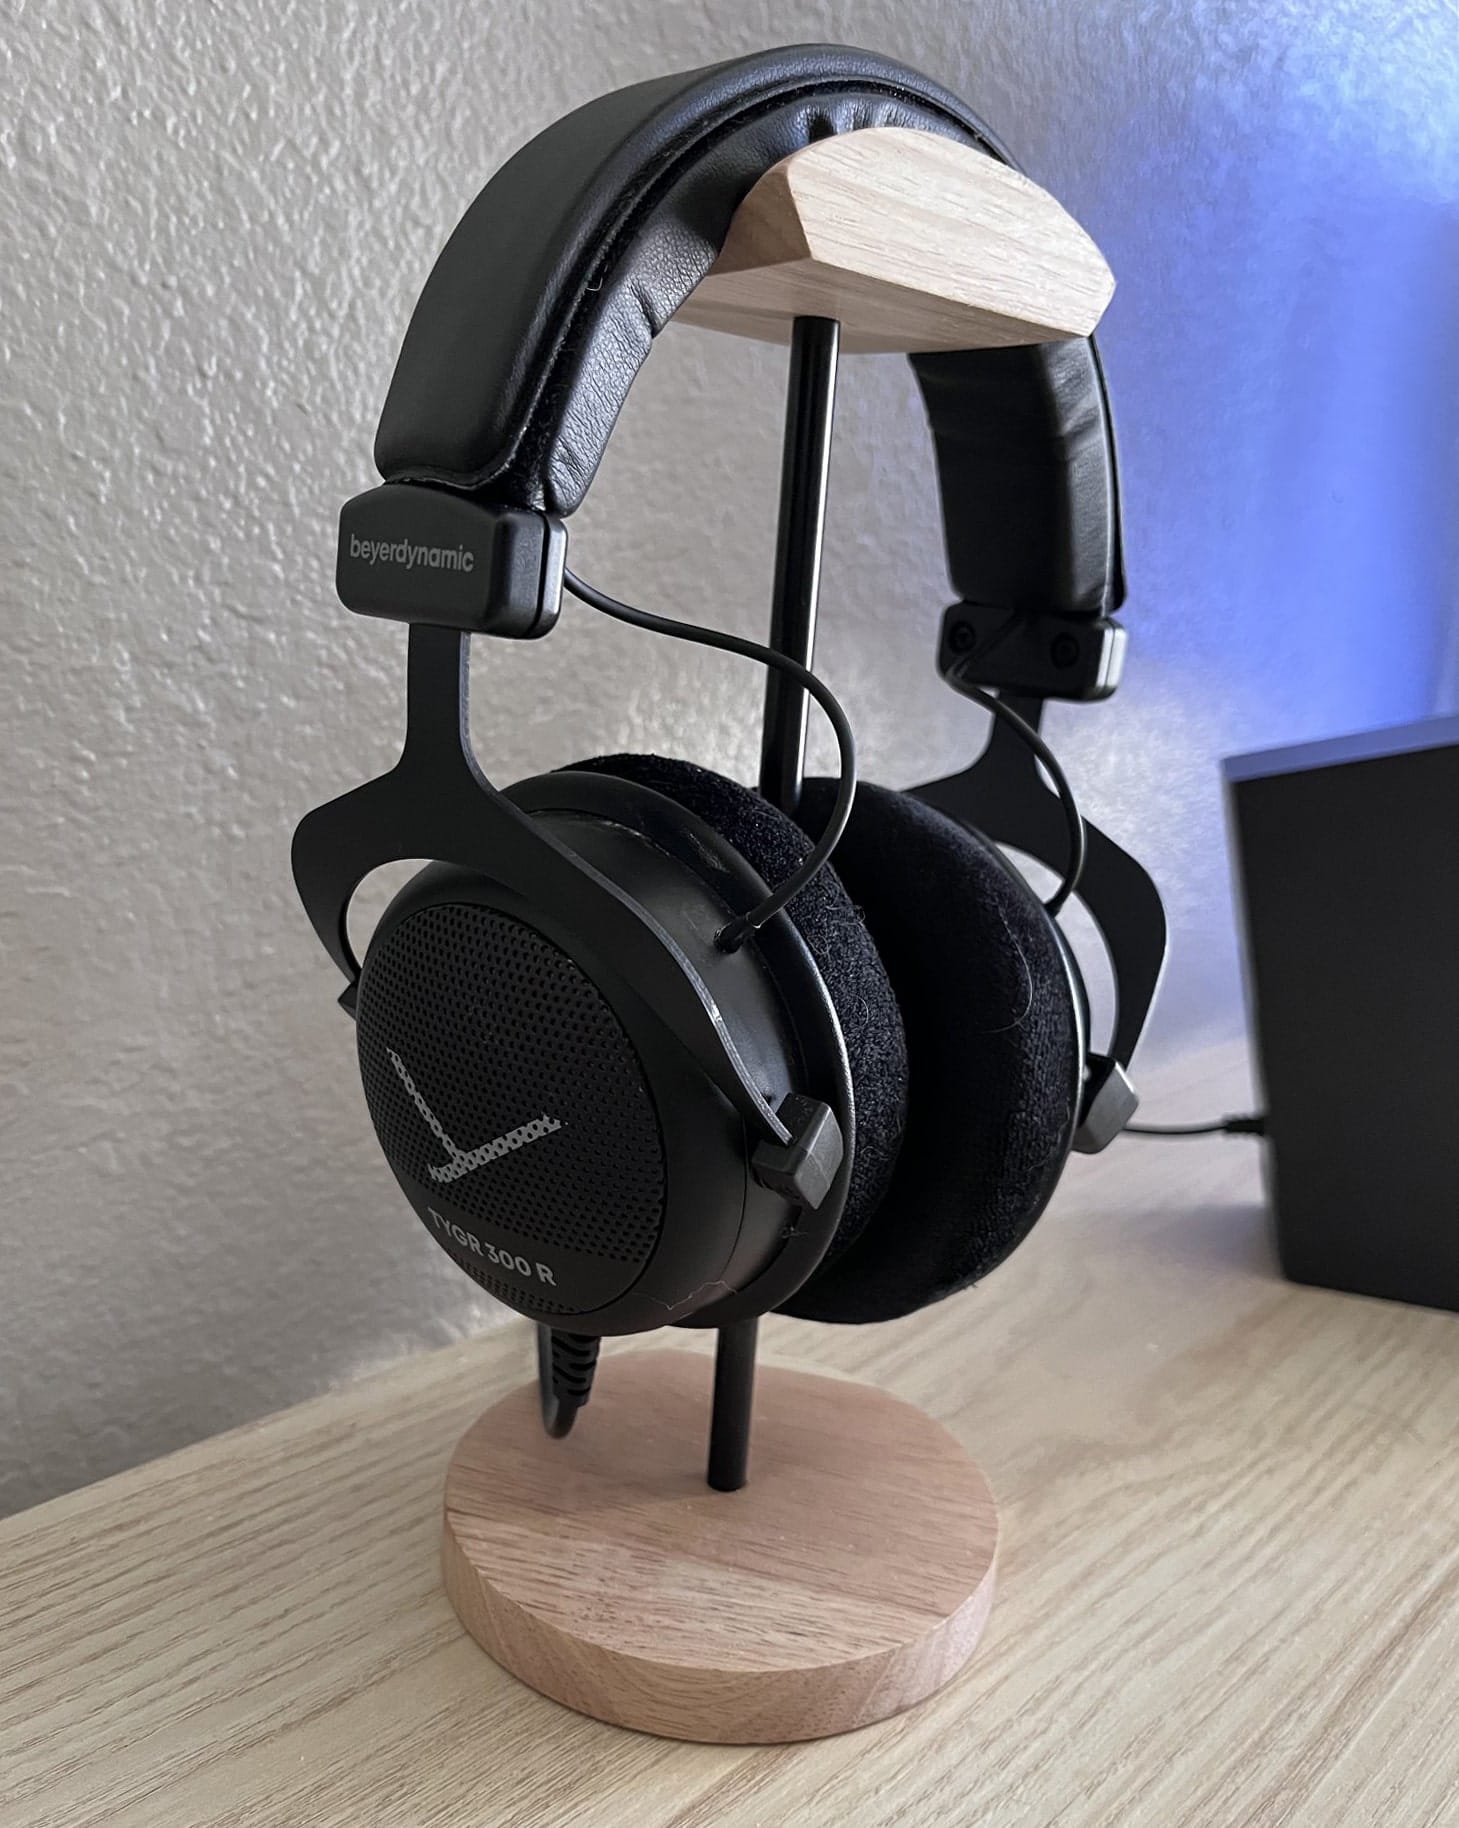 Black open-back headphones from beyerdynamic resting on a wooden stand on a desk